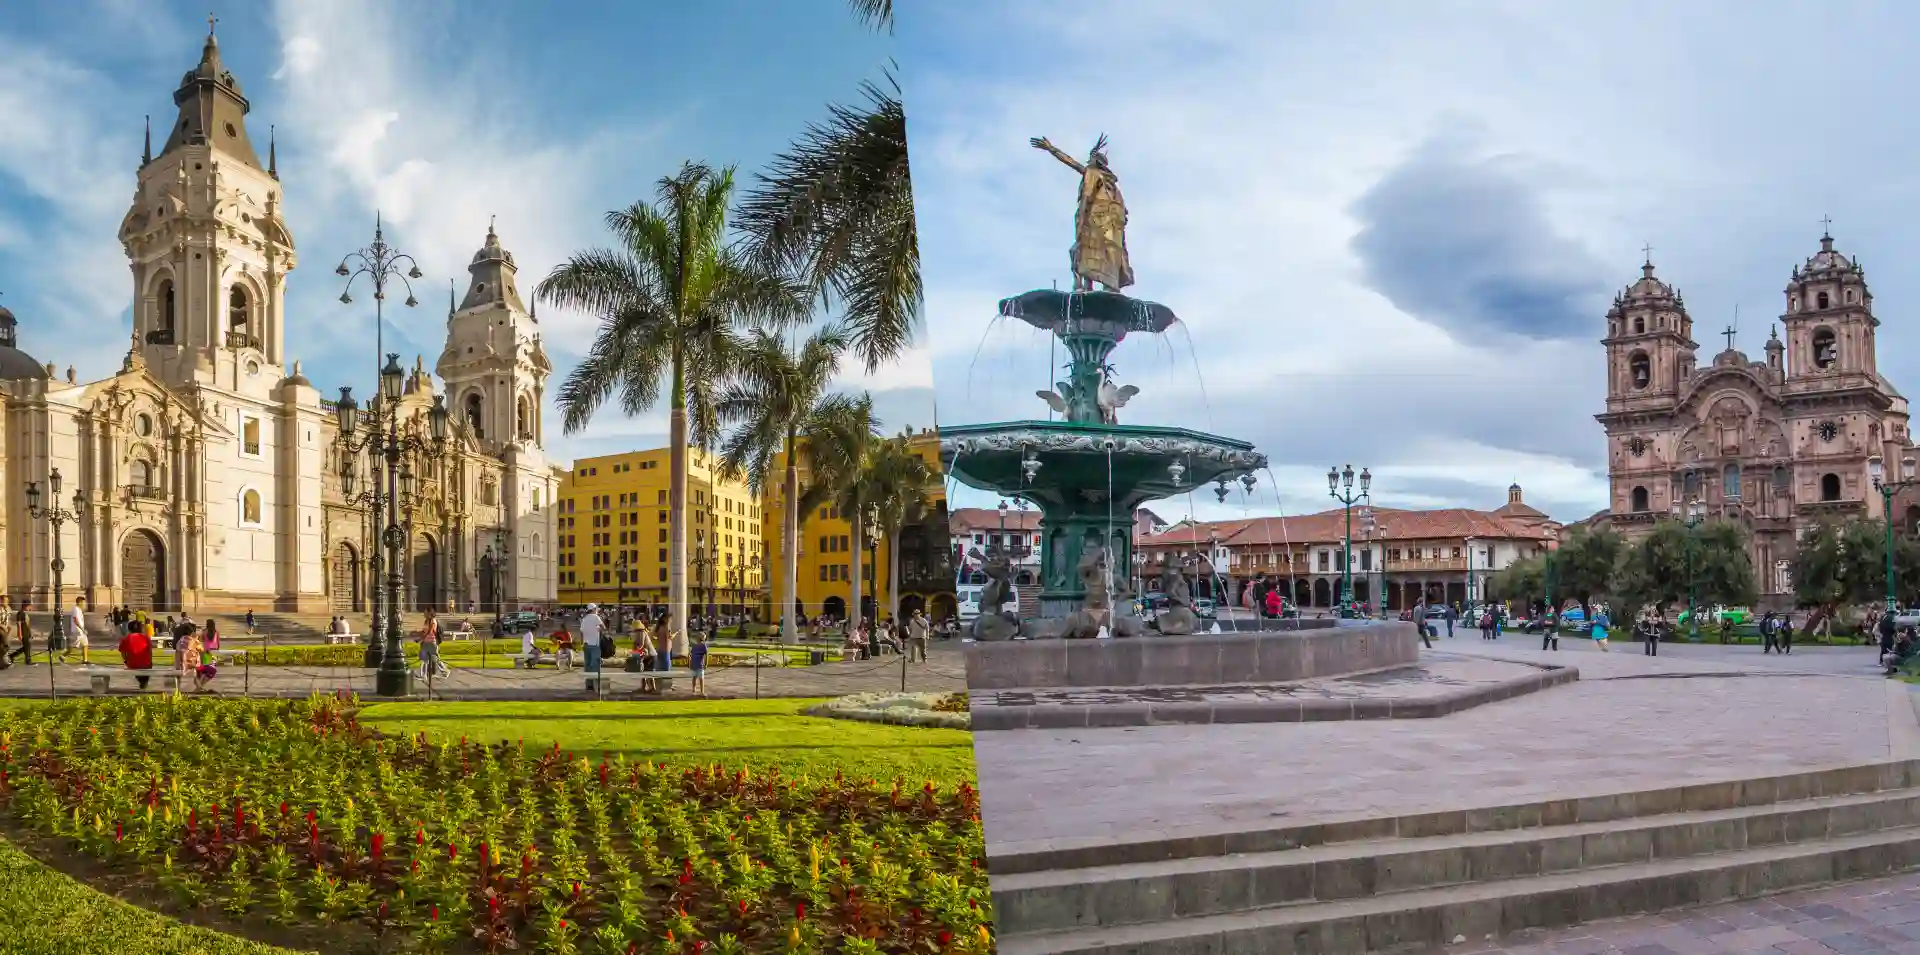 The cities of Lima and Cusco